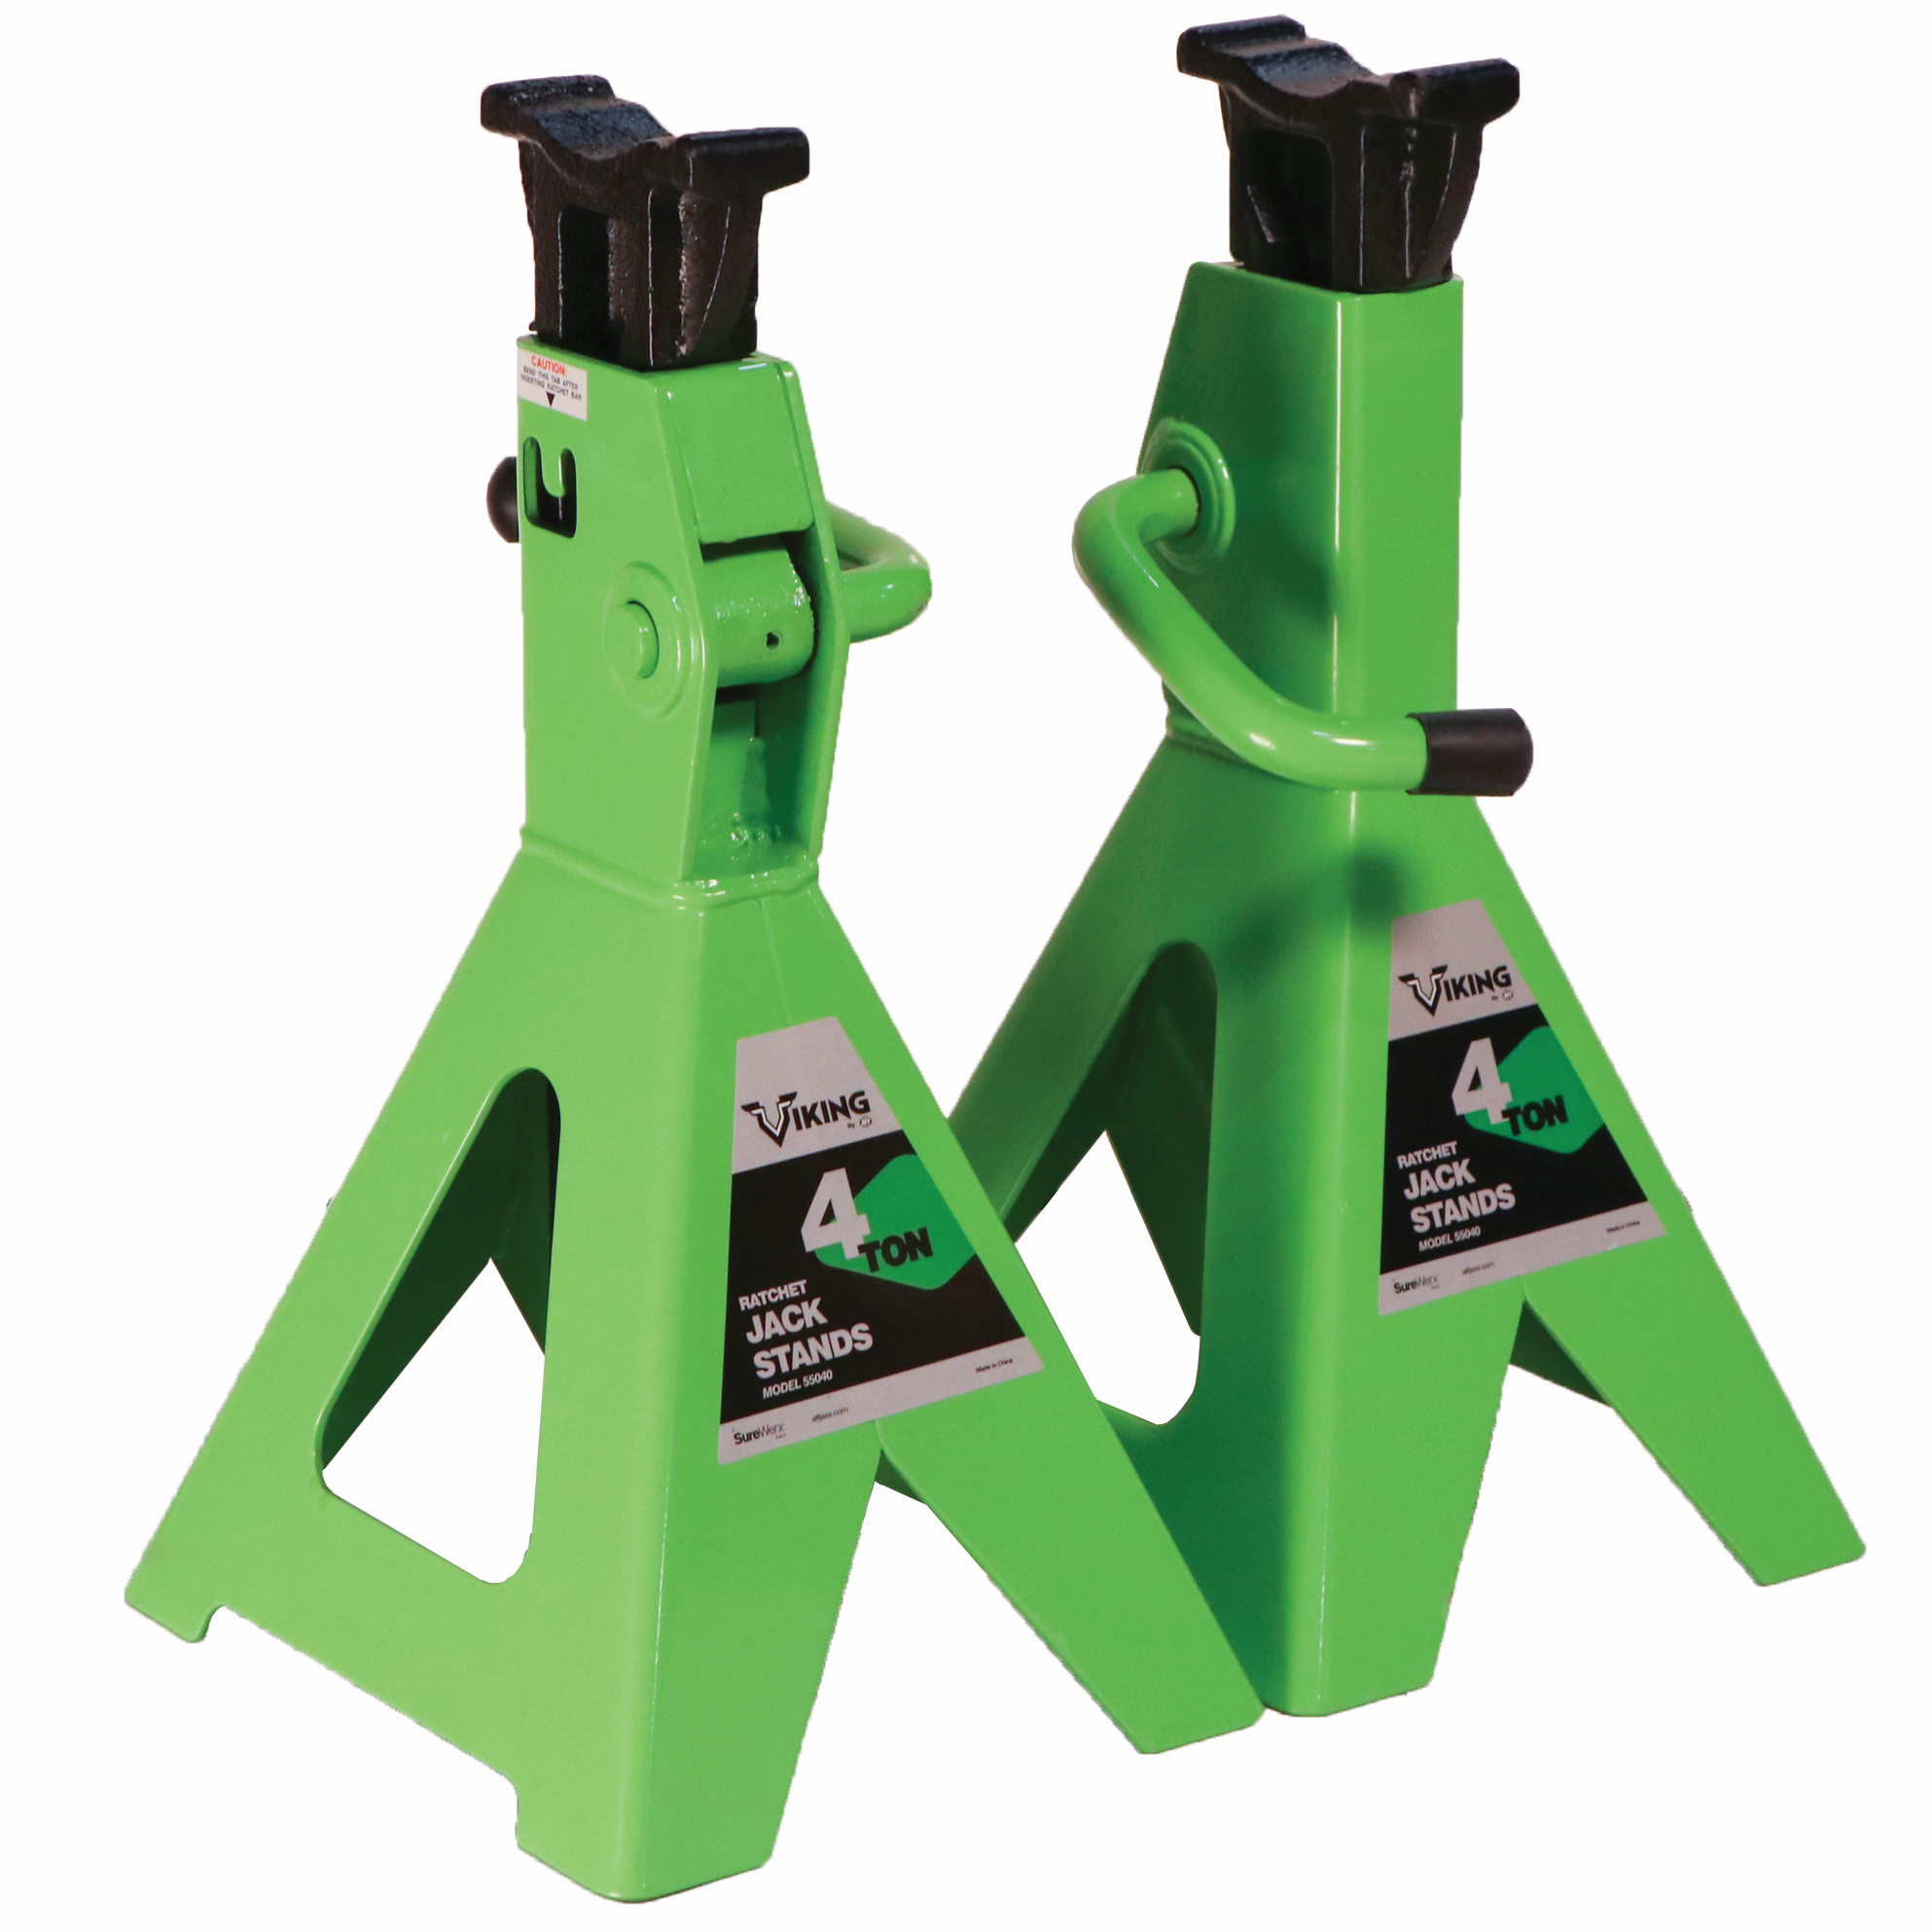 Viking Air Tools - 4 TON VEHICLE STANDS PR. RATCHET STYLE -  55040